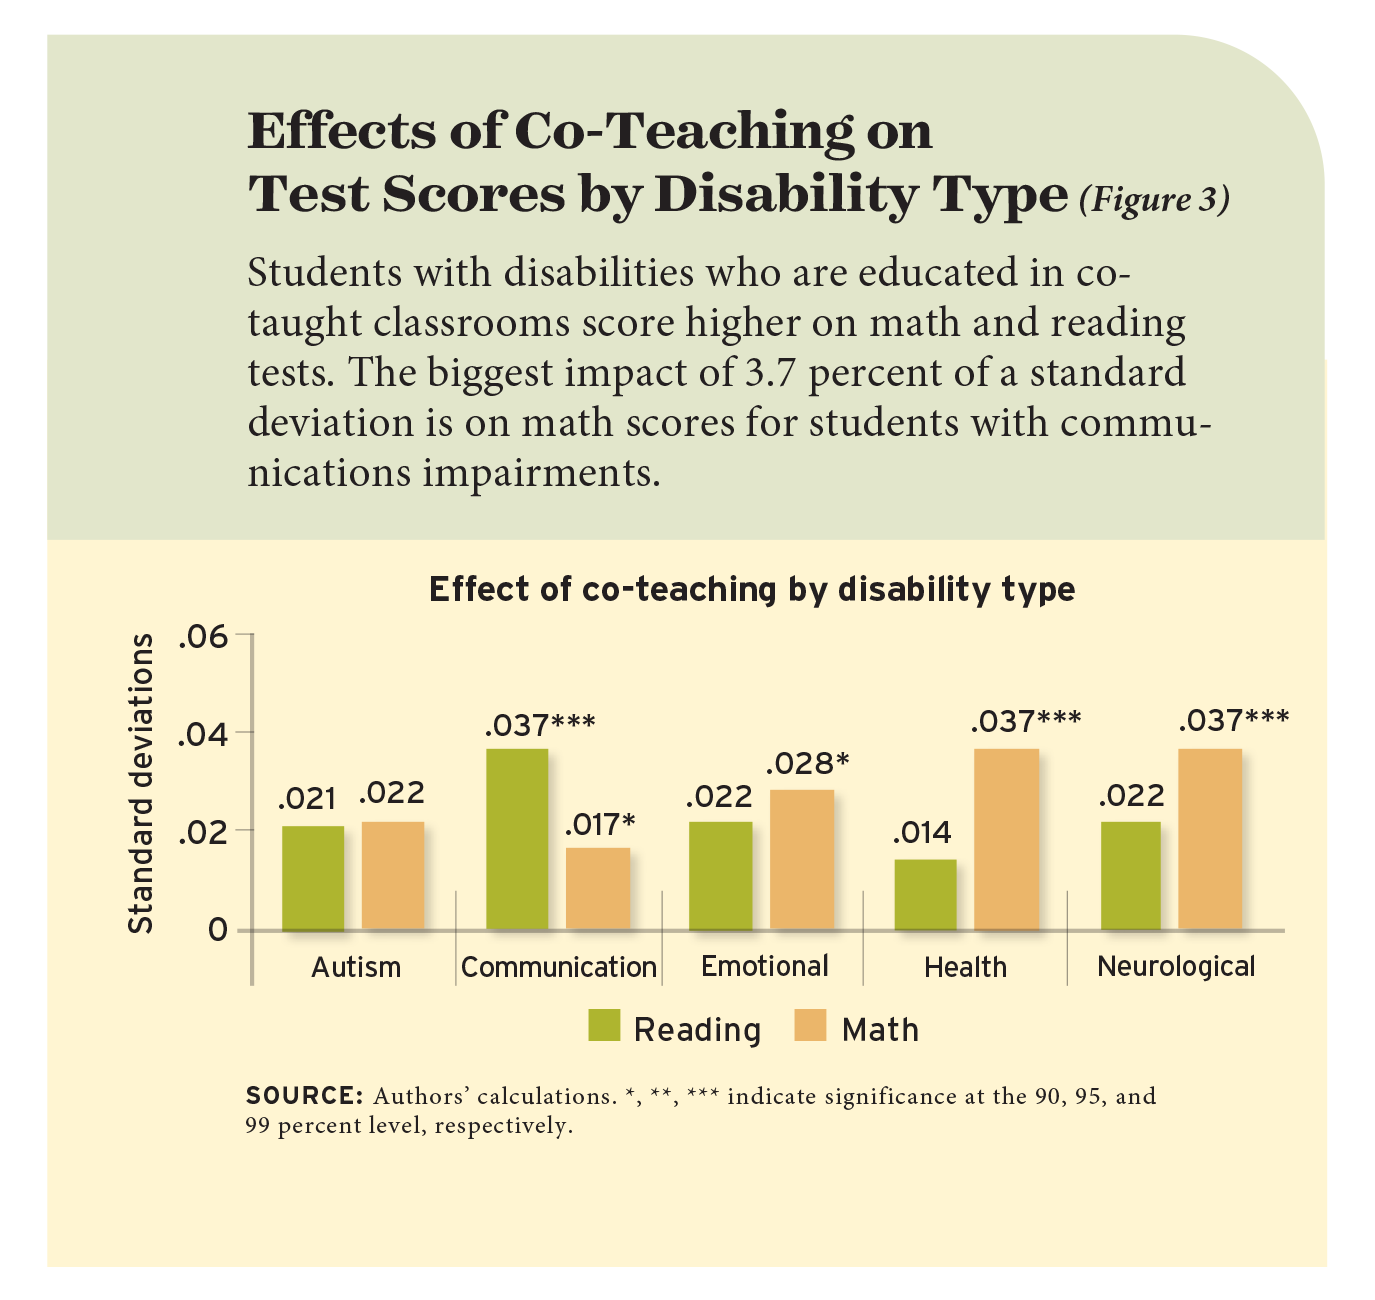 Effects of Co-Teaching on Test Scores by Disability Type (Figure 3)